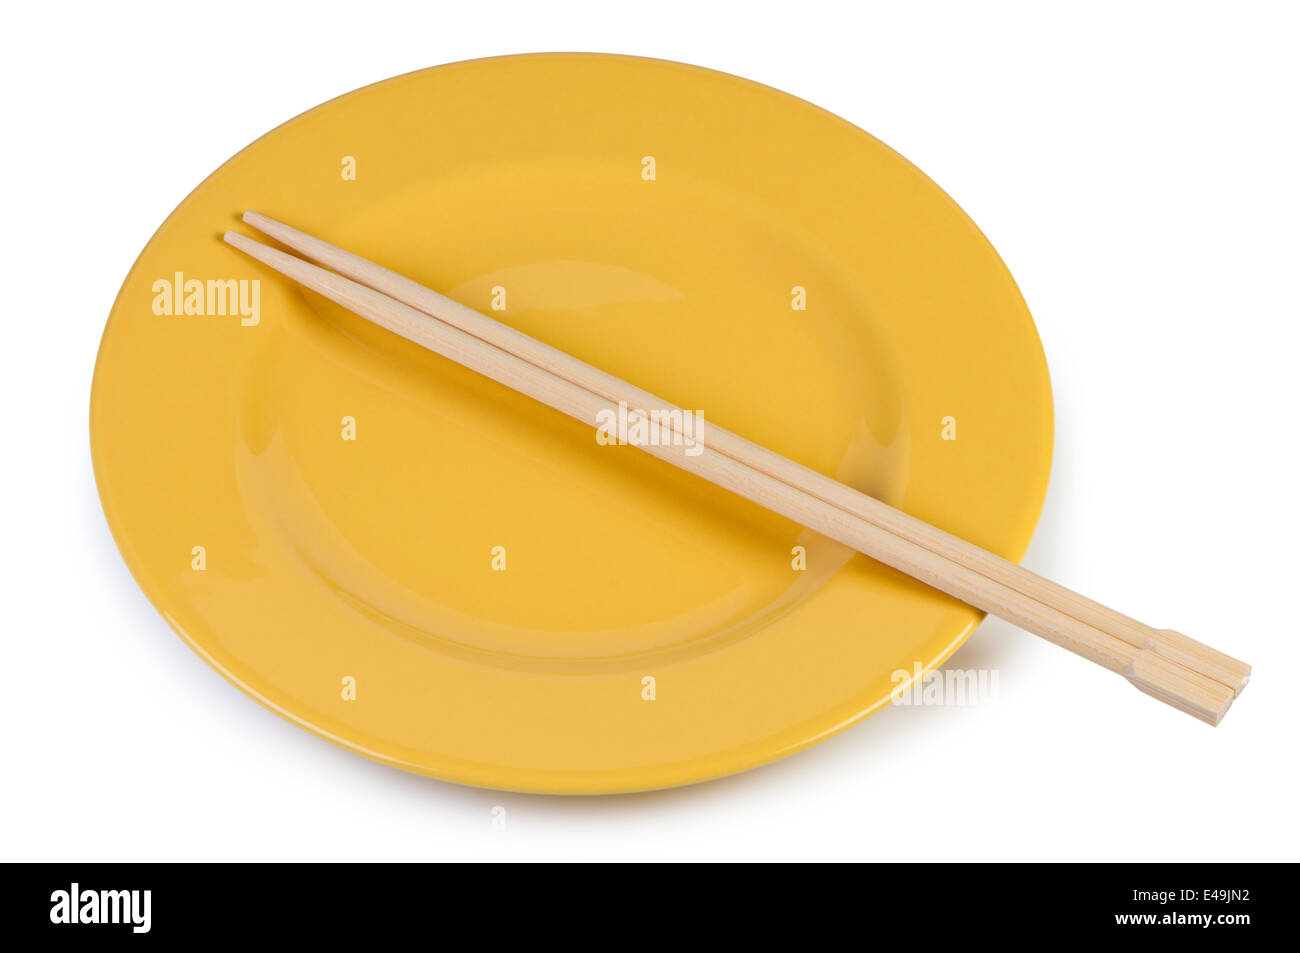 Yellow plate with chopsticks Stock Photo